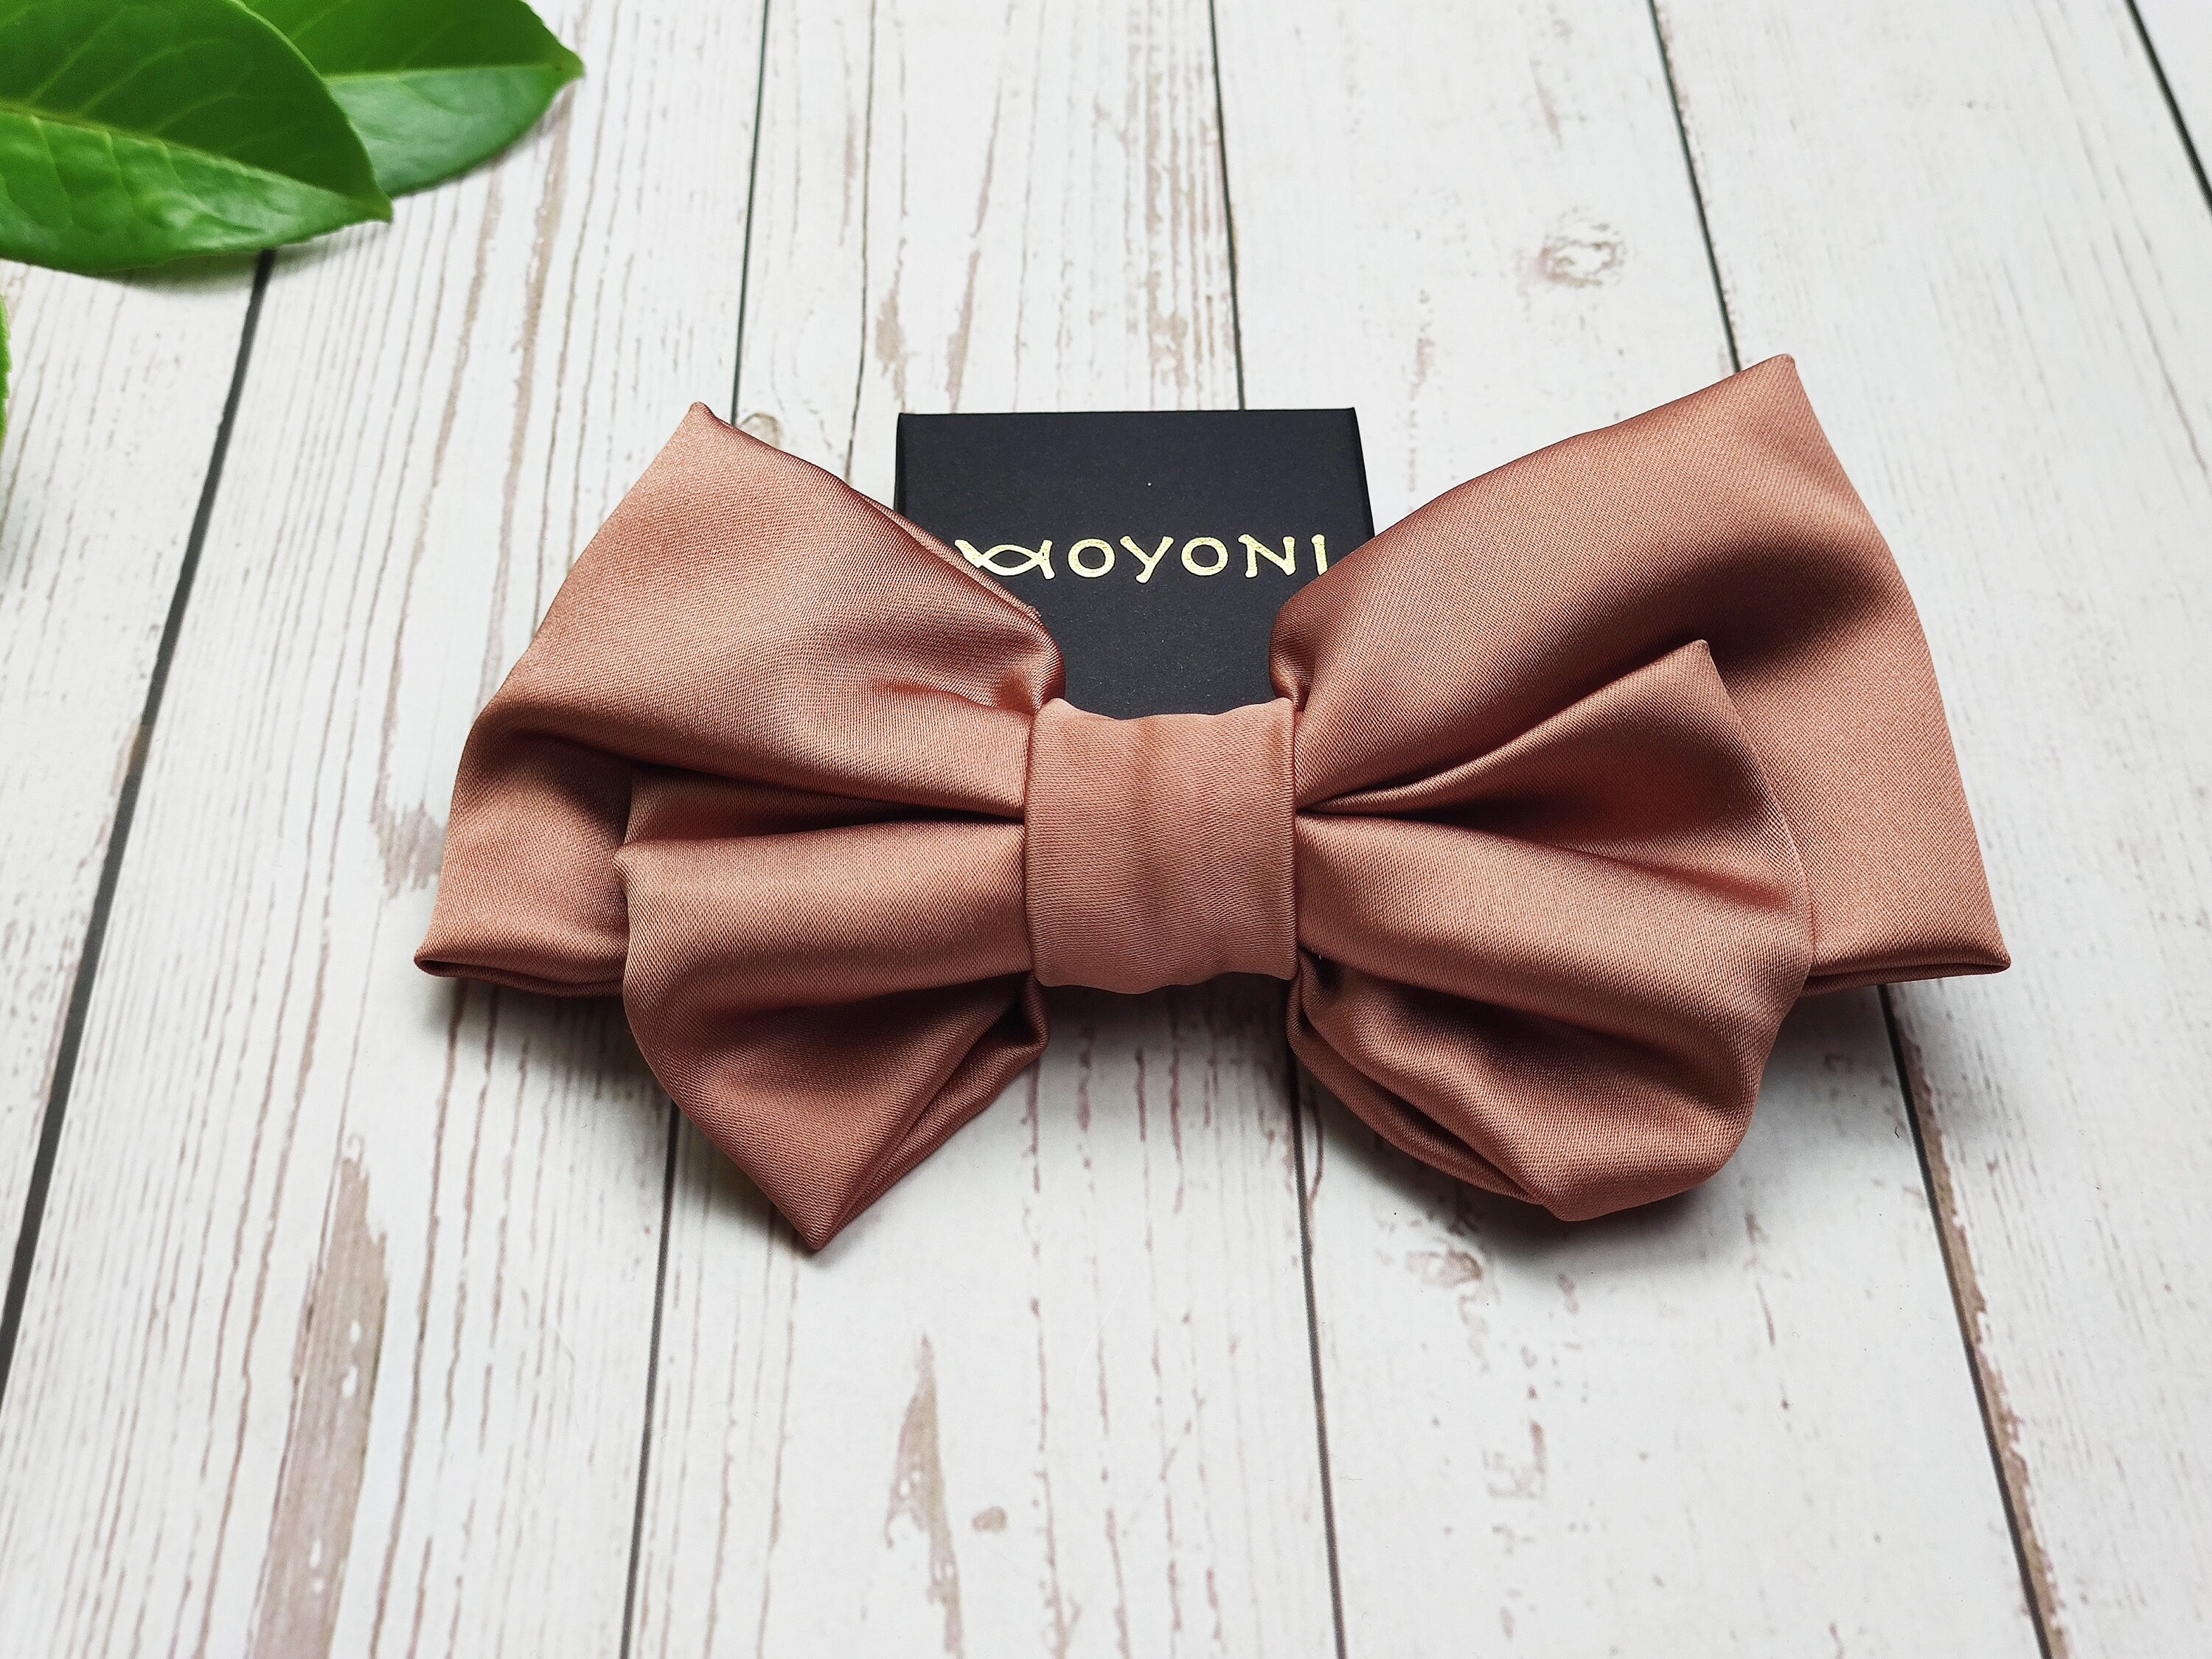 Make a statement with these eye-catching handmade brick and beige satin hair clips with a bow. The soft satin material and fashionable design make them a comfortable and stylish choice for any occasion.